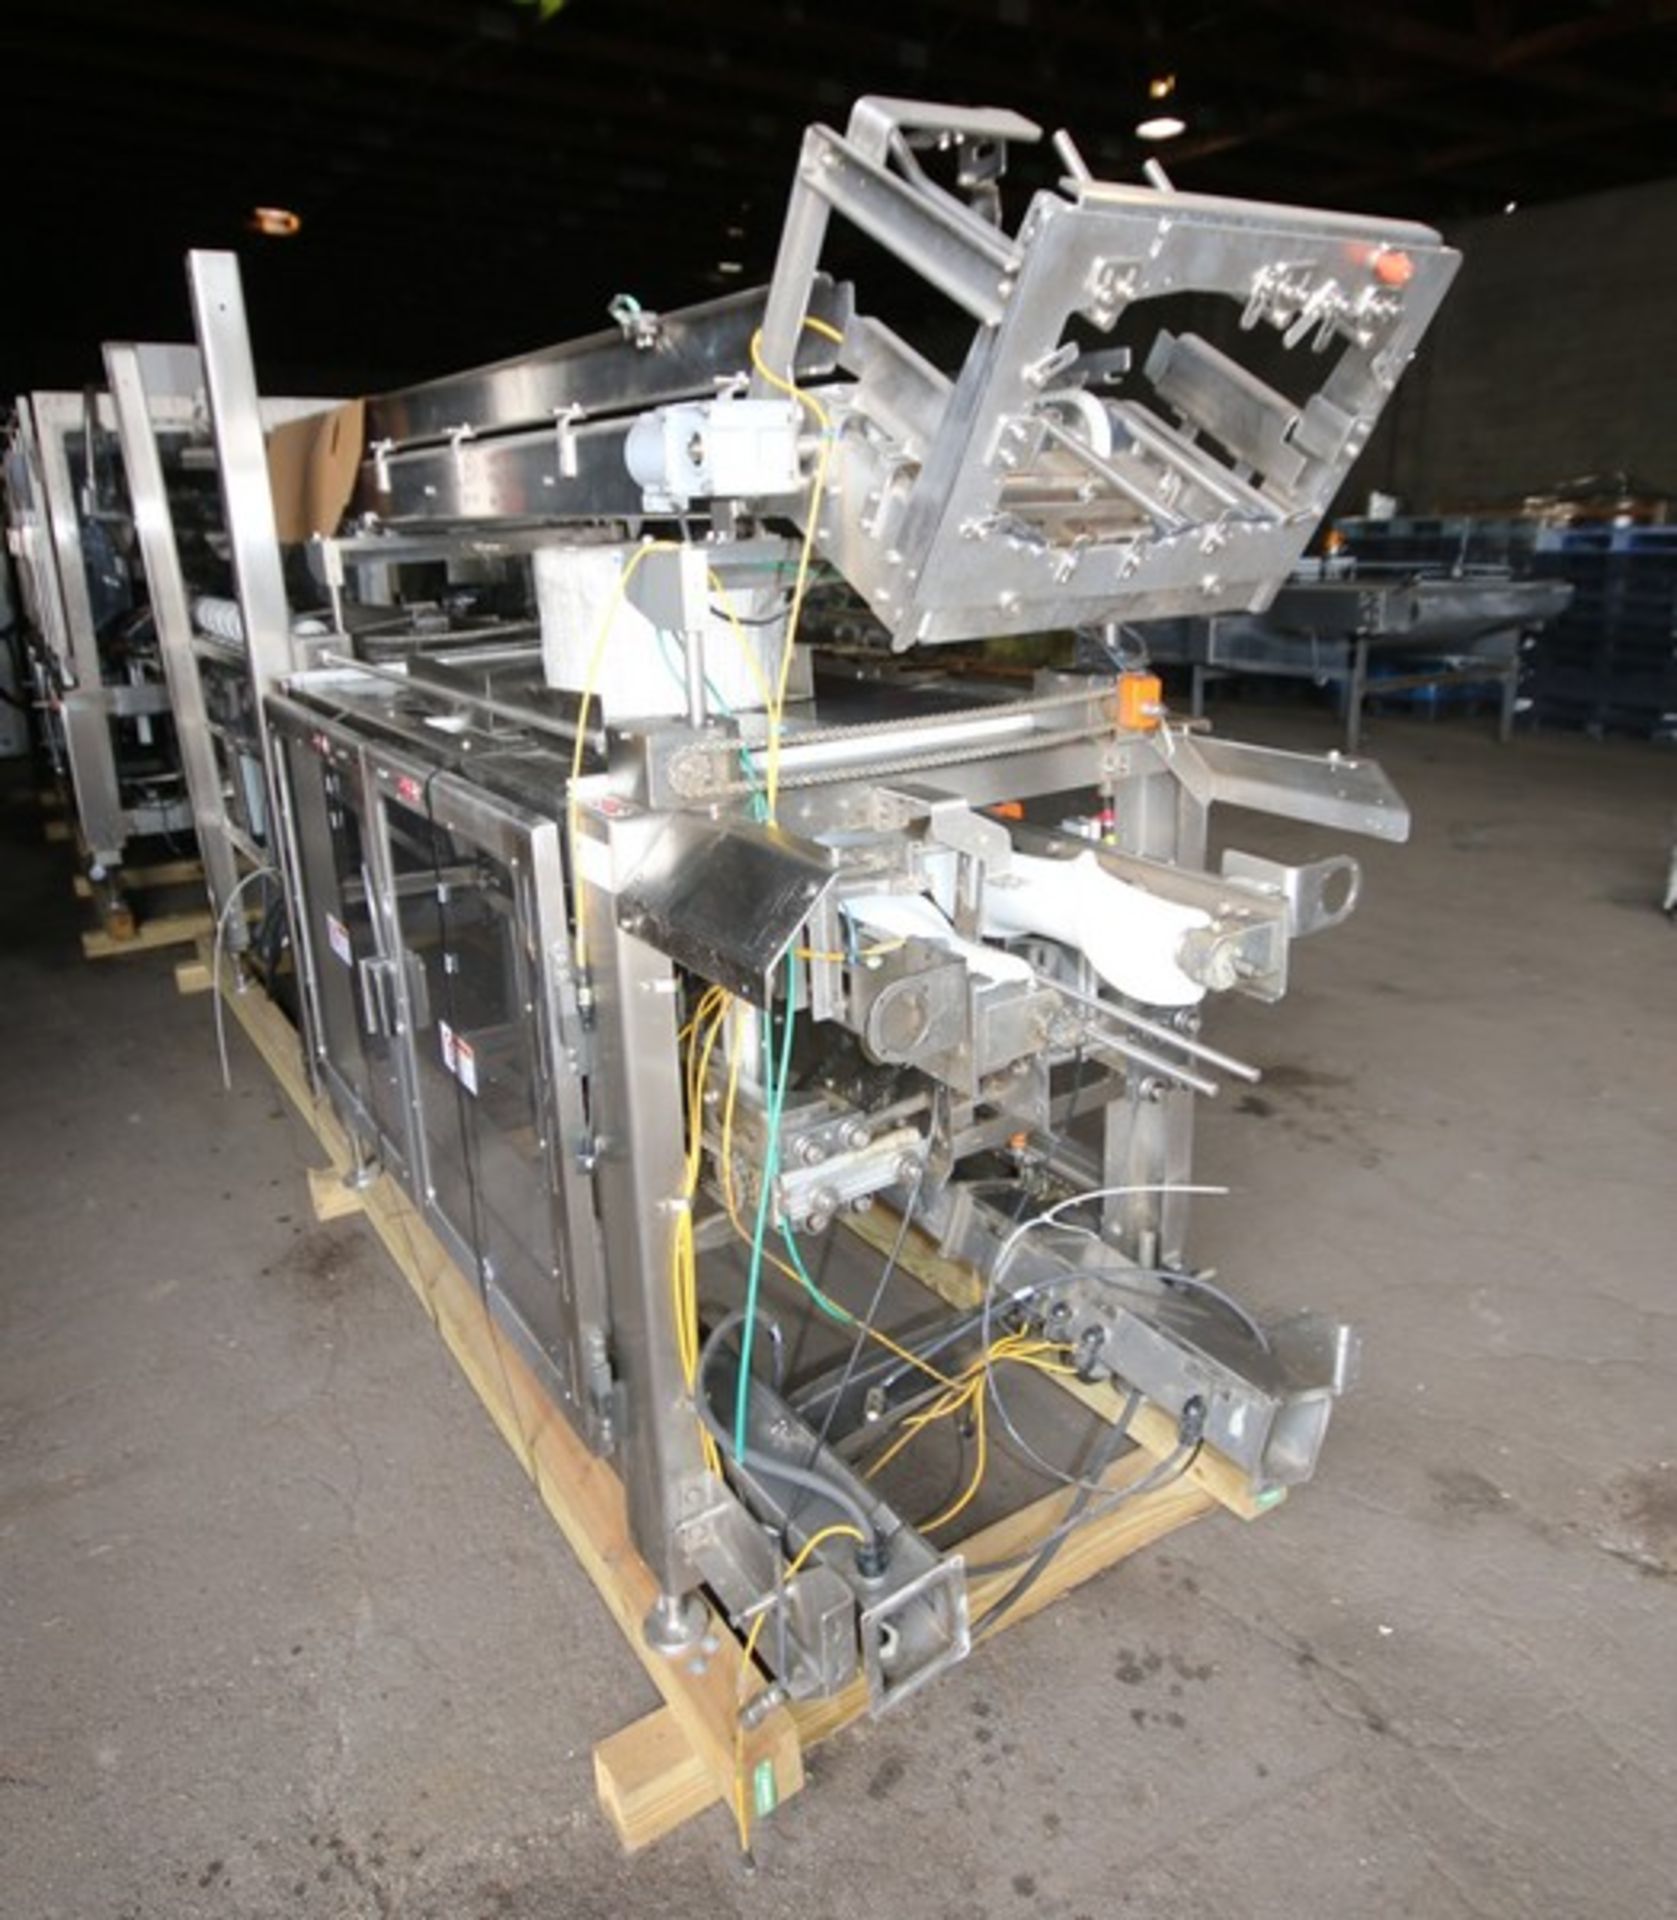 Adco Wrap Around Sleever, M/N 12WAS-2DO-WD, S/N 5172H2, 480 Volts, 3 Phase, with In Feed Conveyor - Image 11 of 15